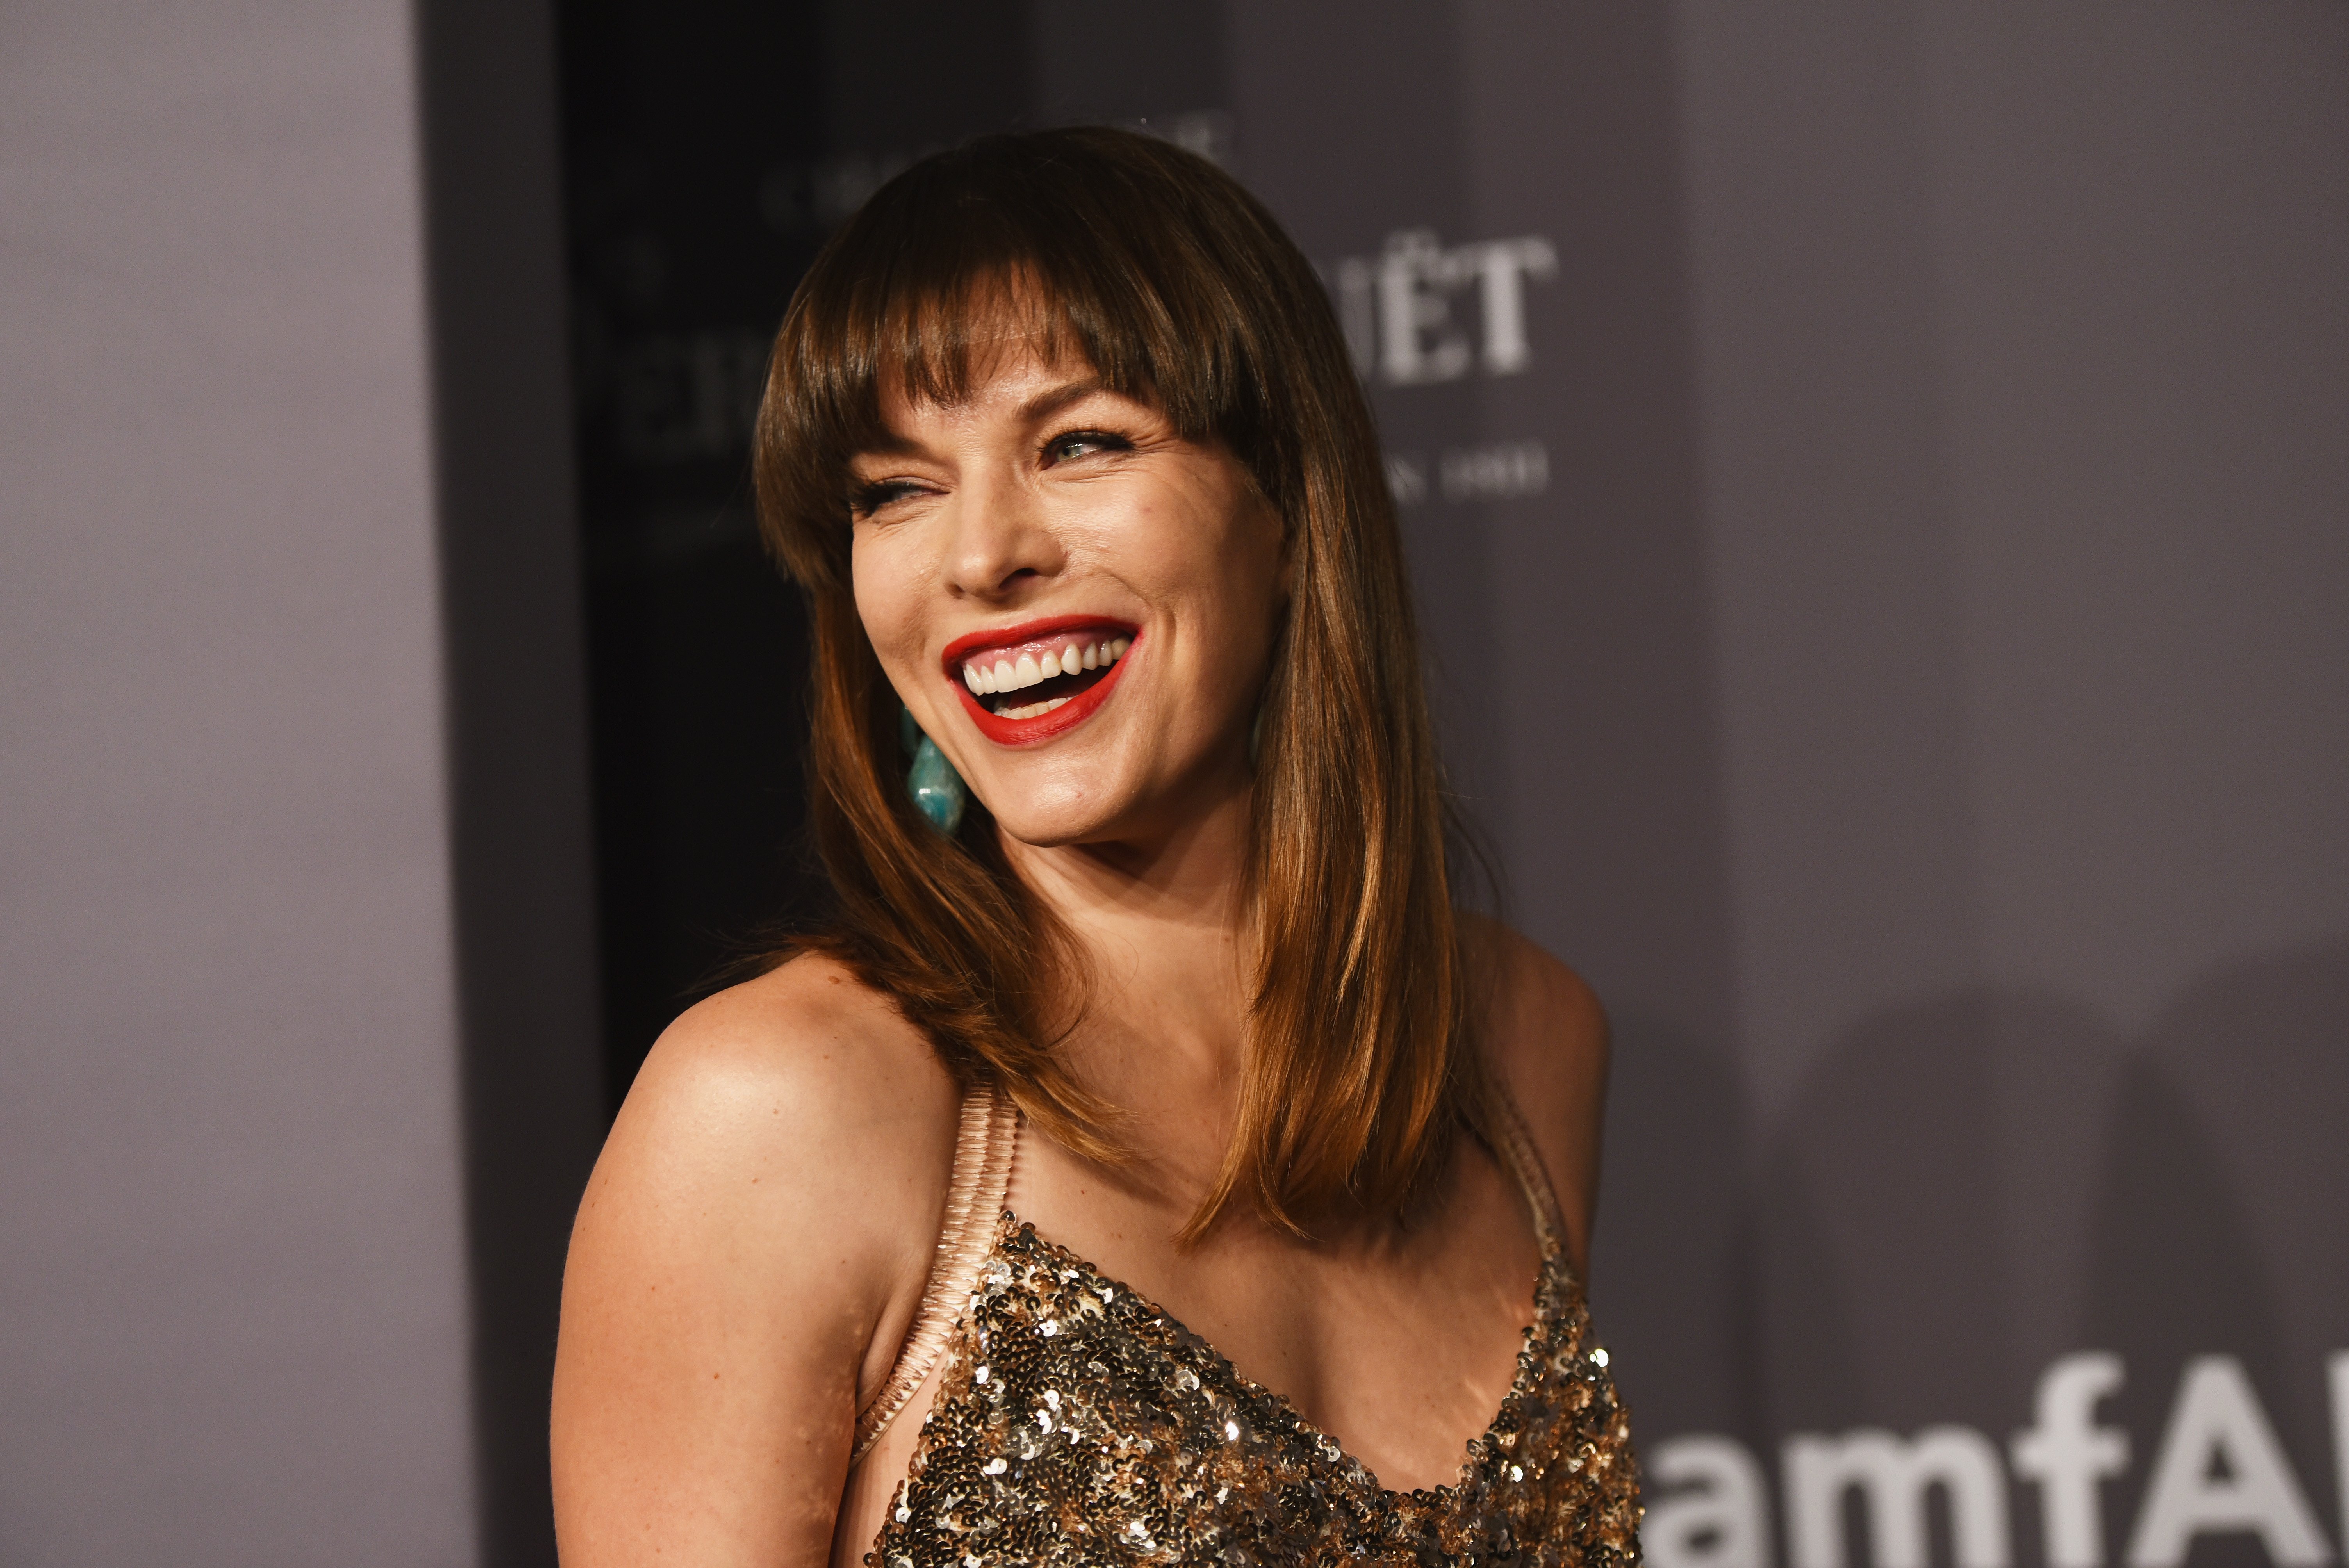 Milla Jovovich attends the amfAR New York Gala at Cipriana Wall Street in New York City on February 6, 2019 | Photo: Getty Images